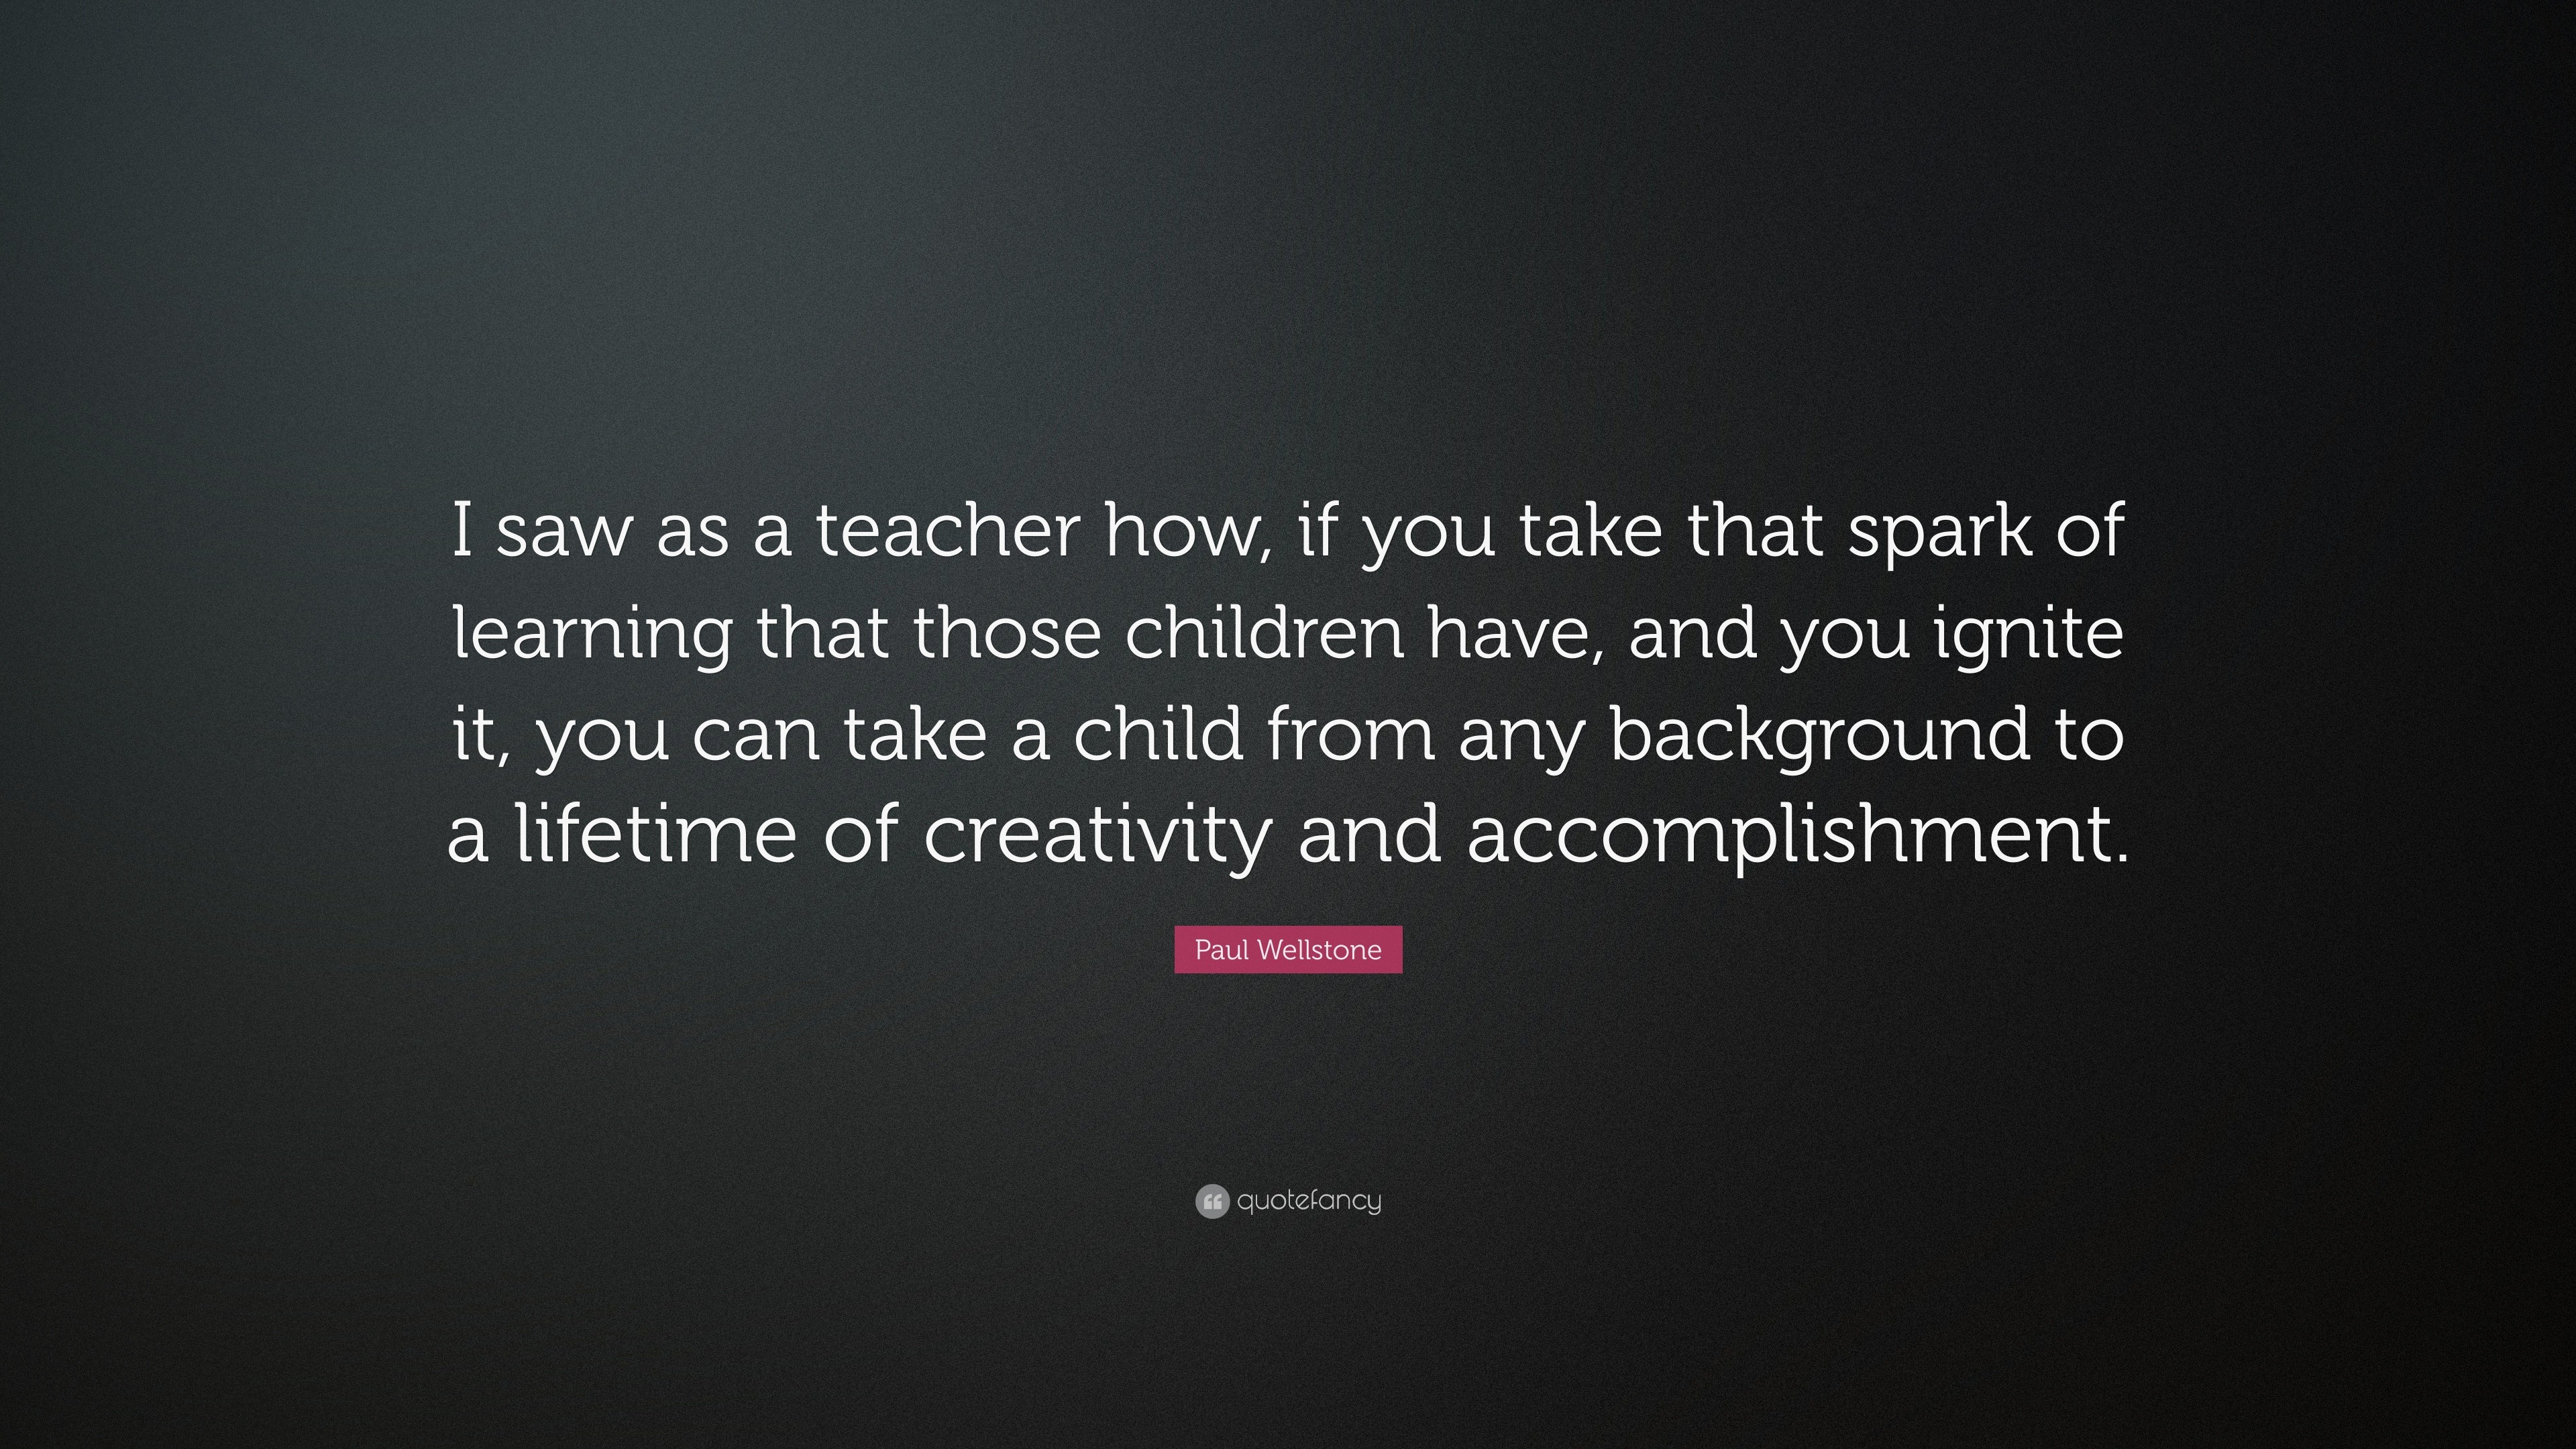 Igniting the Spark in Every Child